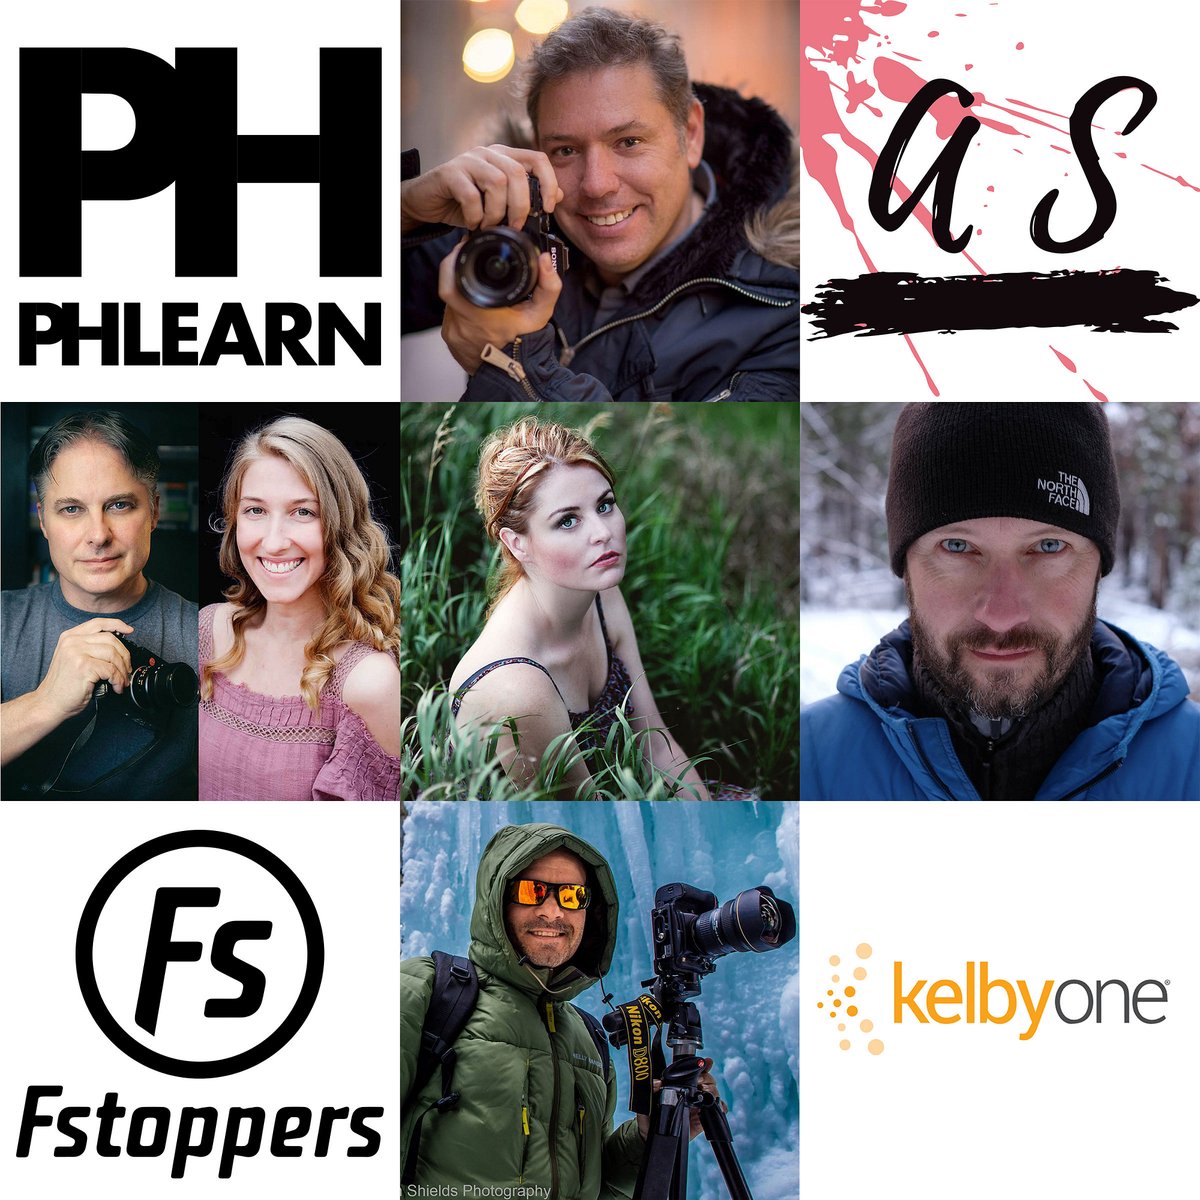 We truly couldn't do what we do without the help of our FANTASTIC partners! THANK YOU!

@PHLEARN @photoserge #AlexStemplewski #SebastianMichaels #BrookeShaden @jdrossin @nigeldanson @fstoppers #TimShields @KelbyOne 

#5daydealdifferencemaker #5daydifference #5daydealphoto